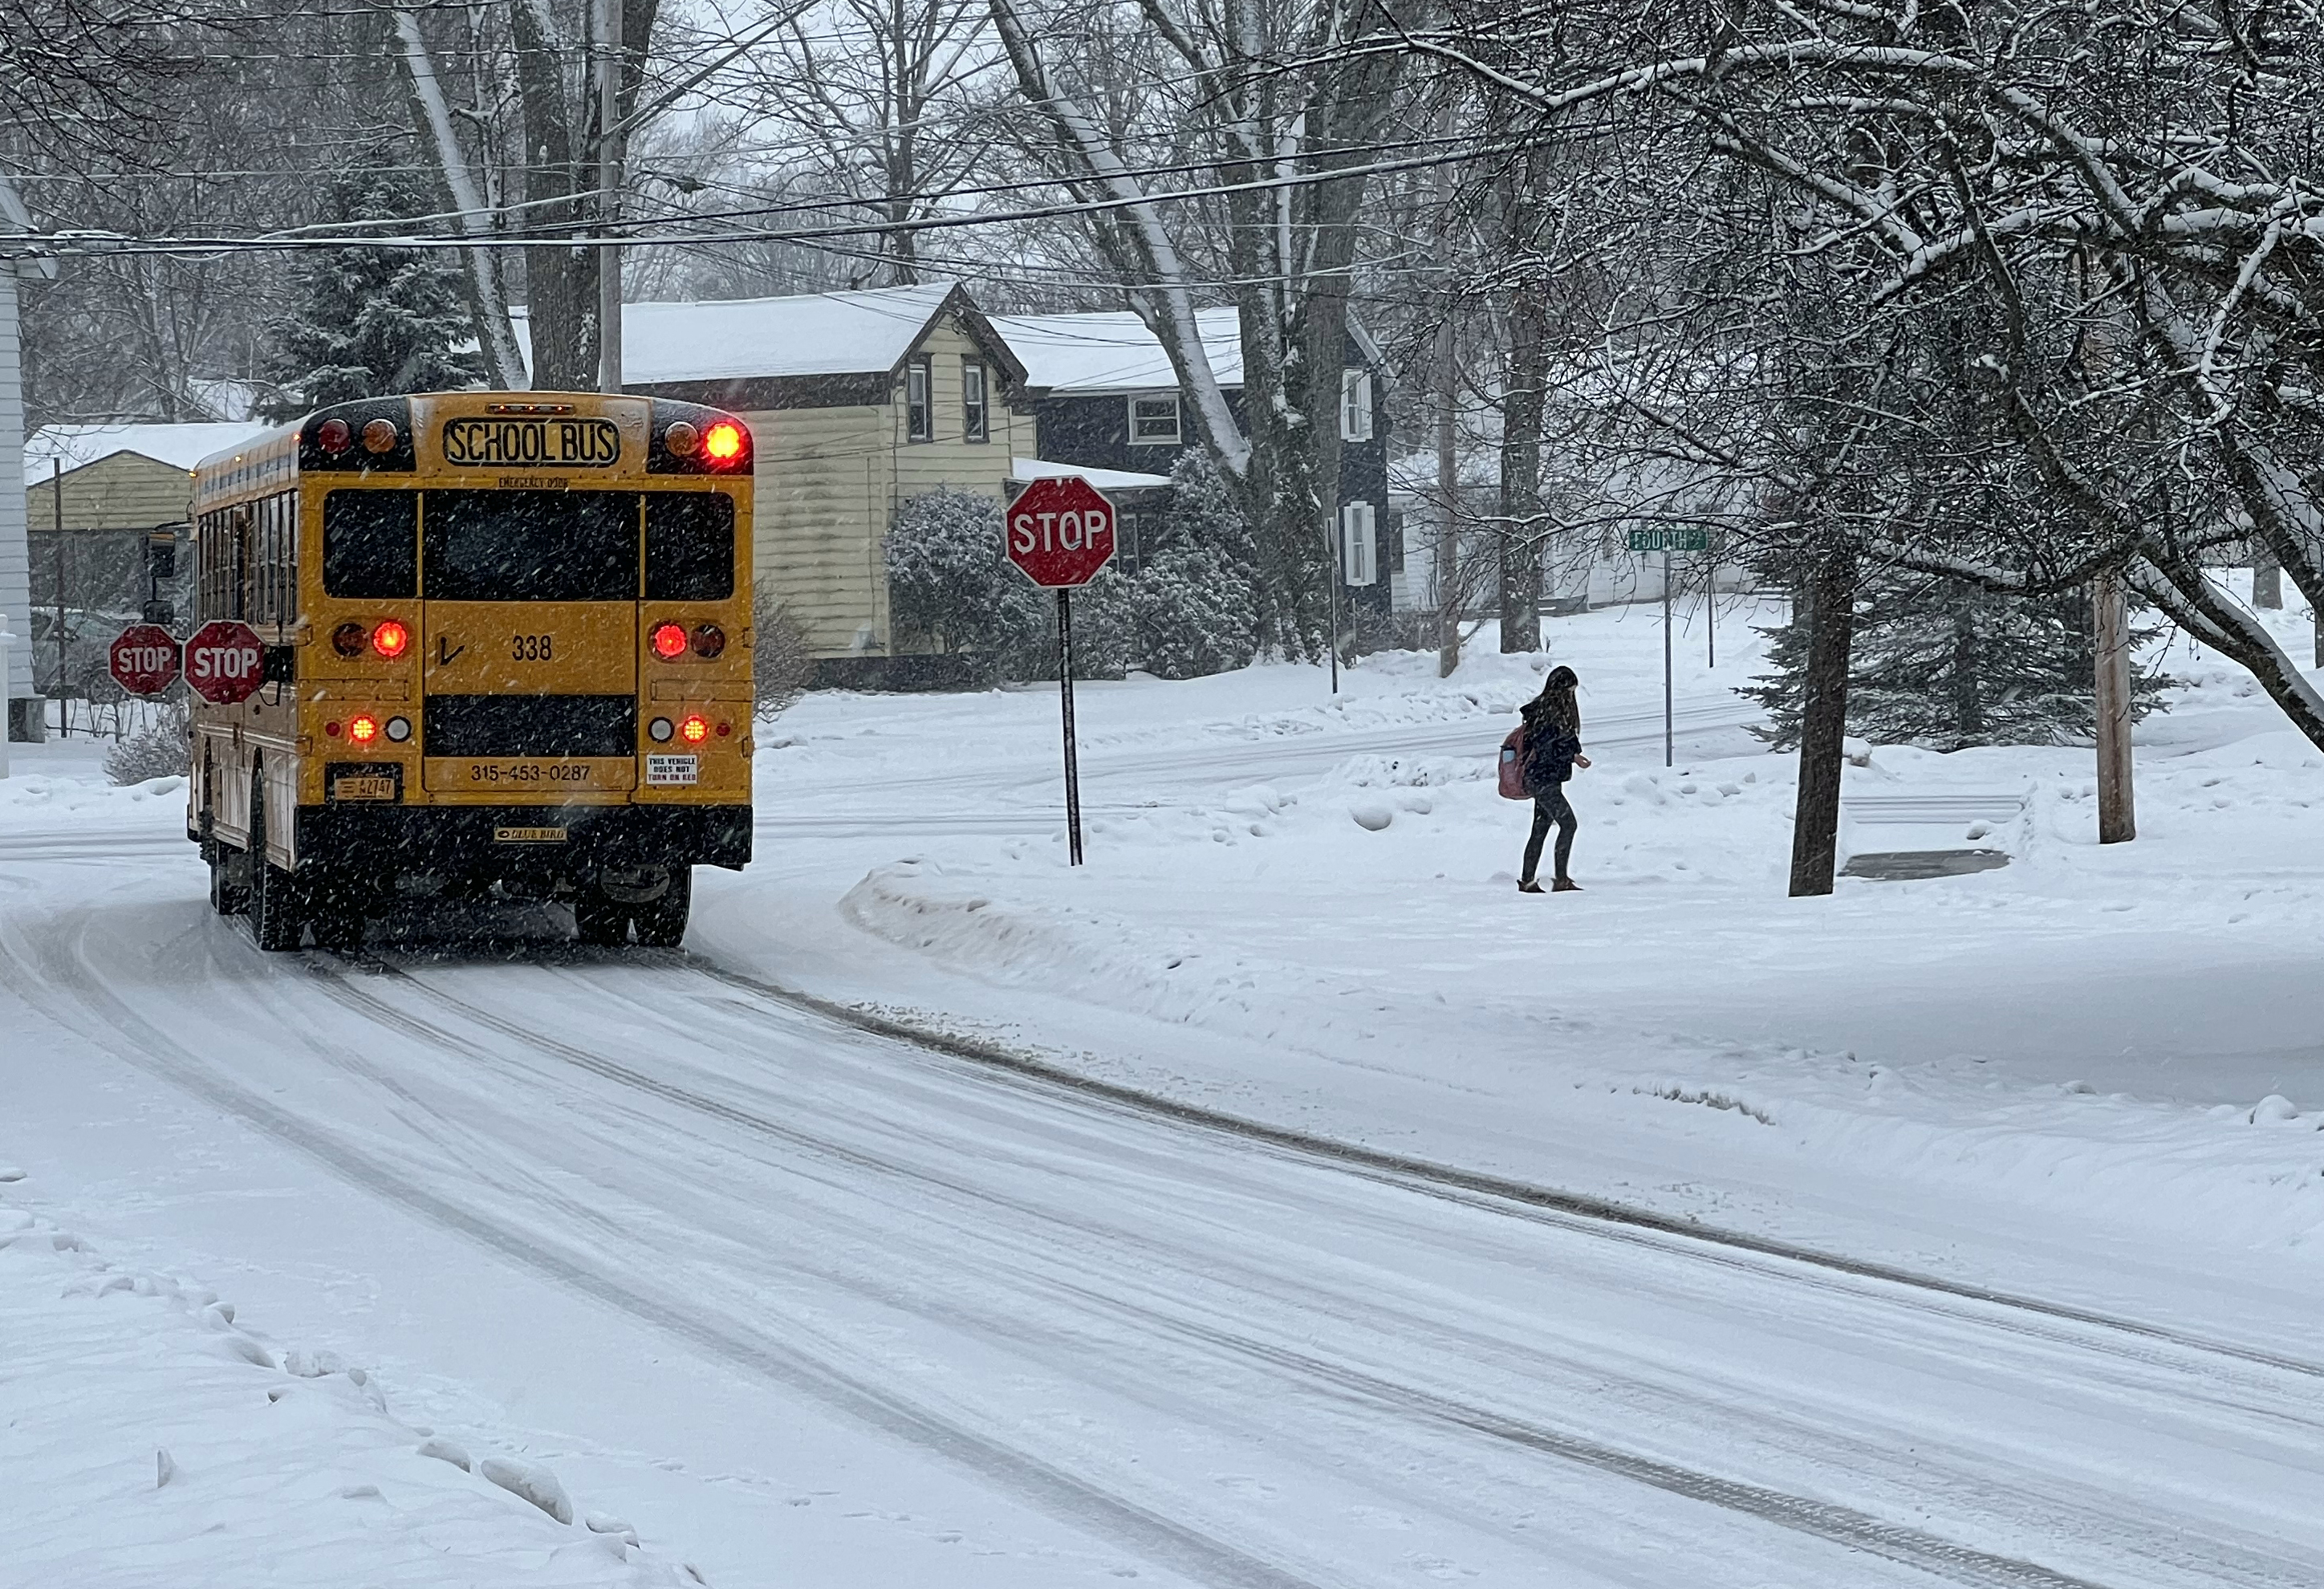 Schools closing as icy storm moves in